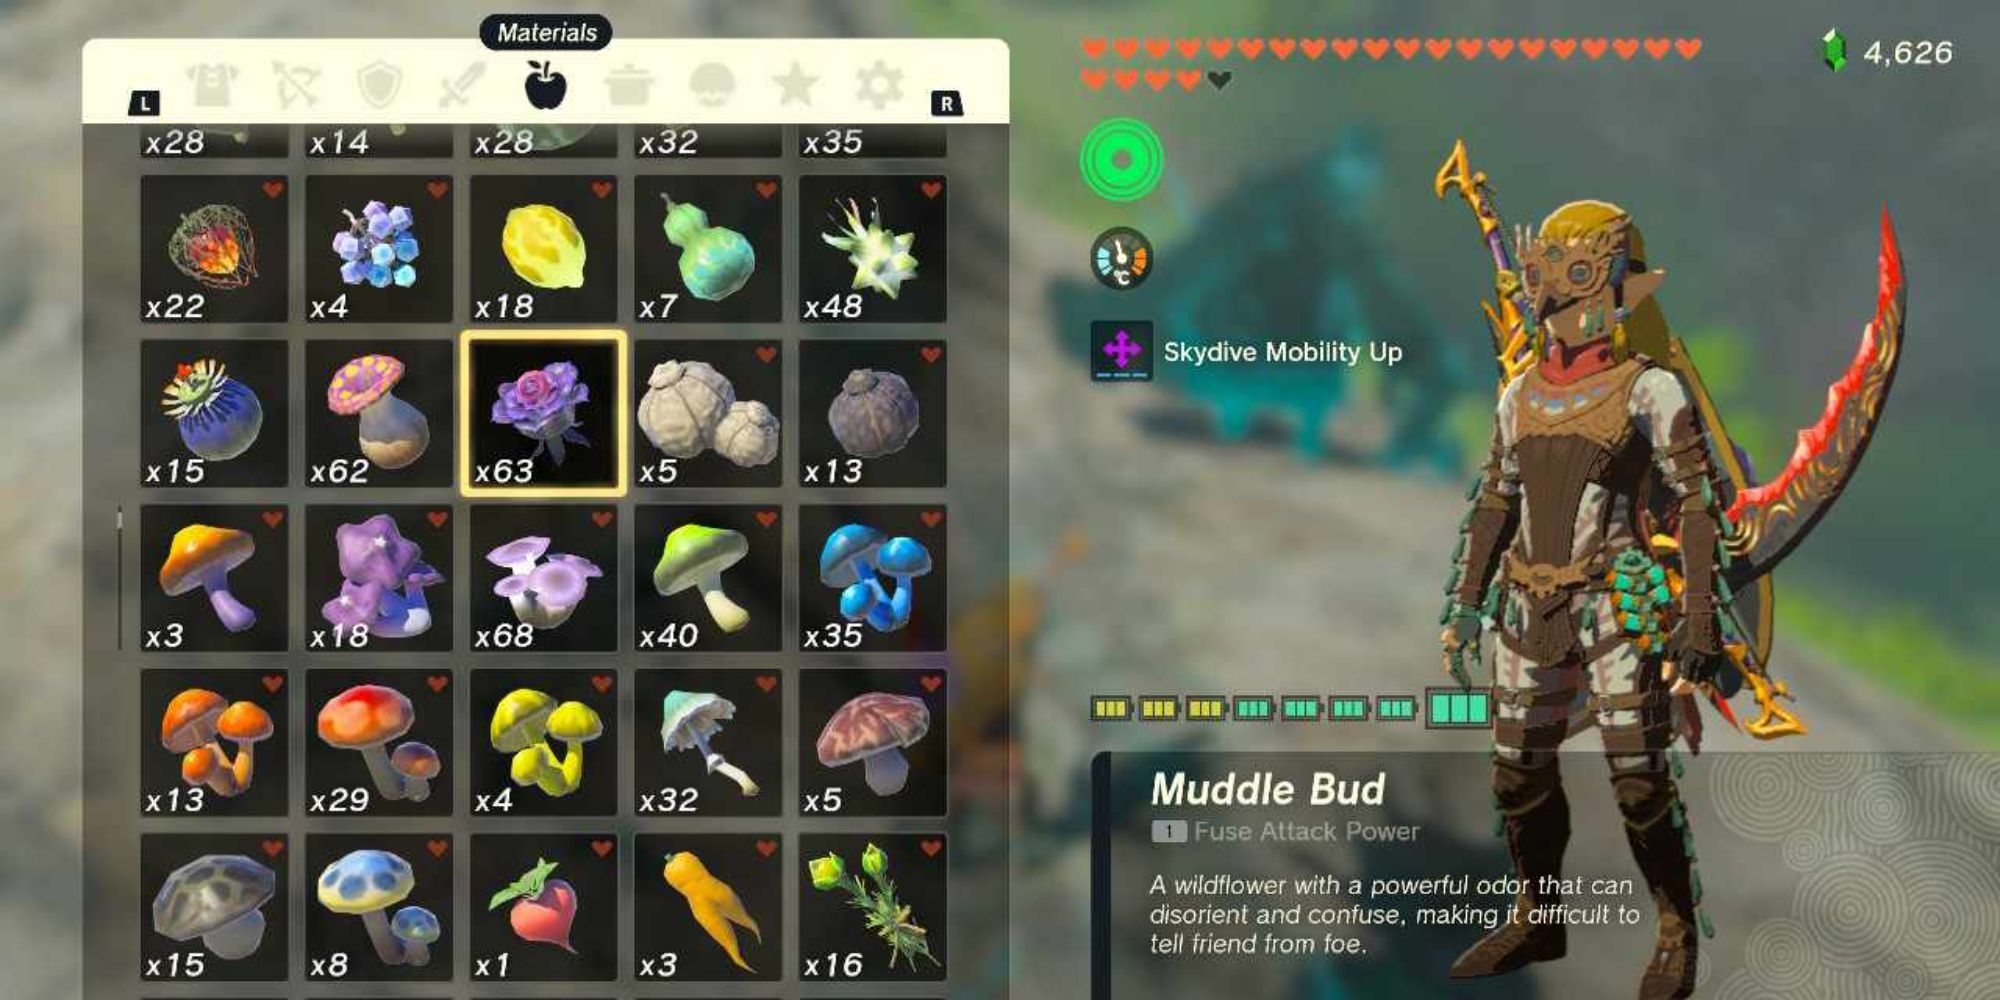 Link from Tears of the Kingdom stood beside his inventory, which is showing a Muddle Bud